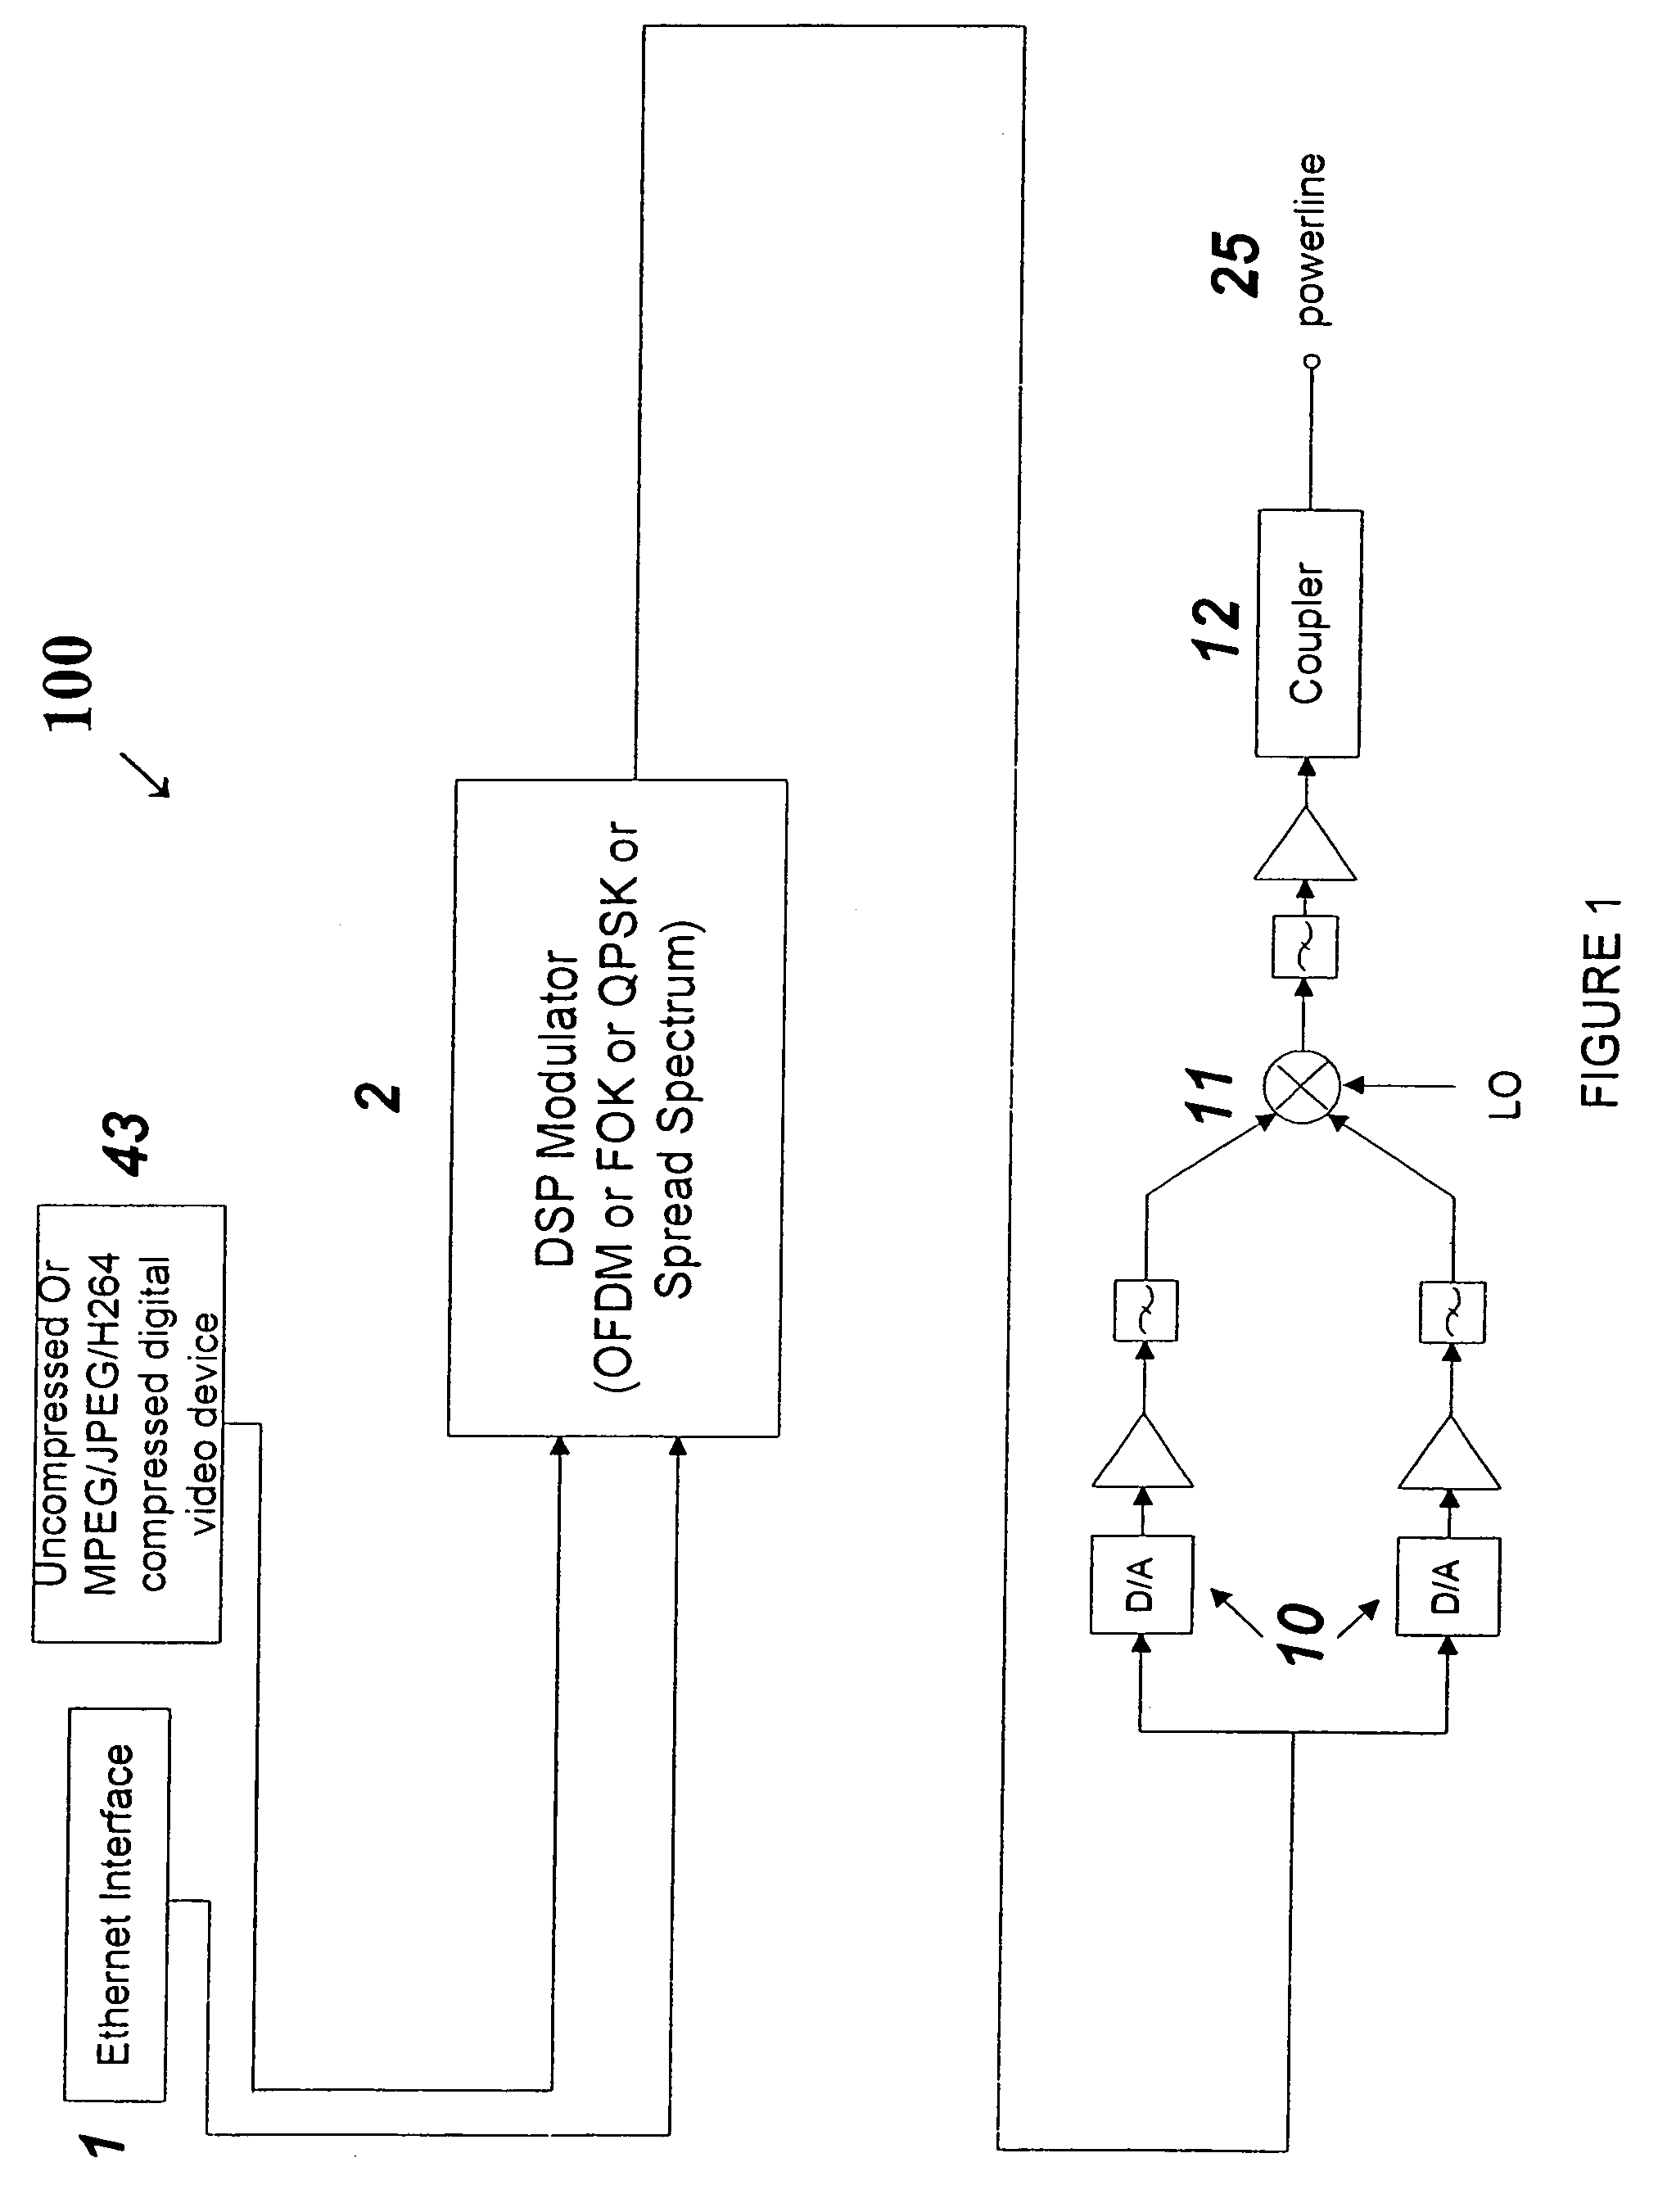 Apparatus and method for transmitting digital data over various communication media